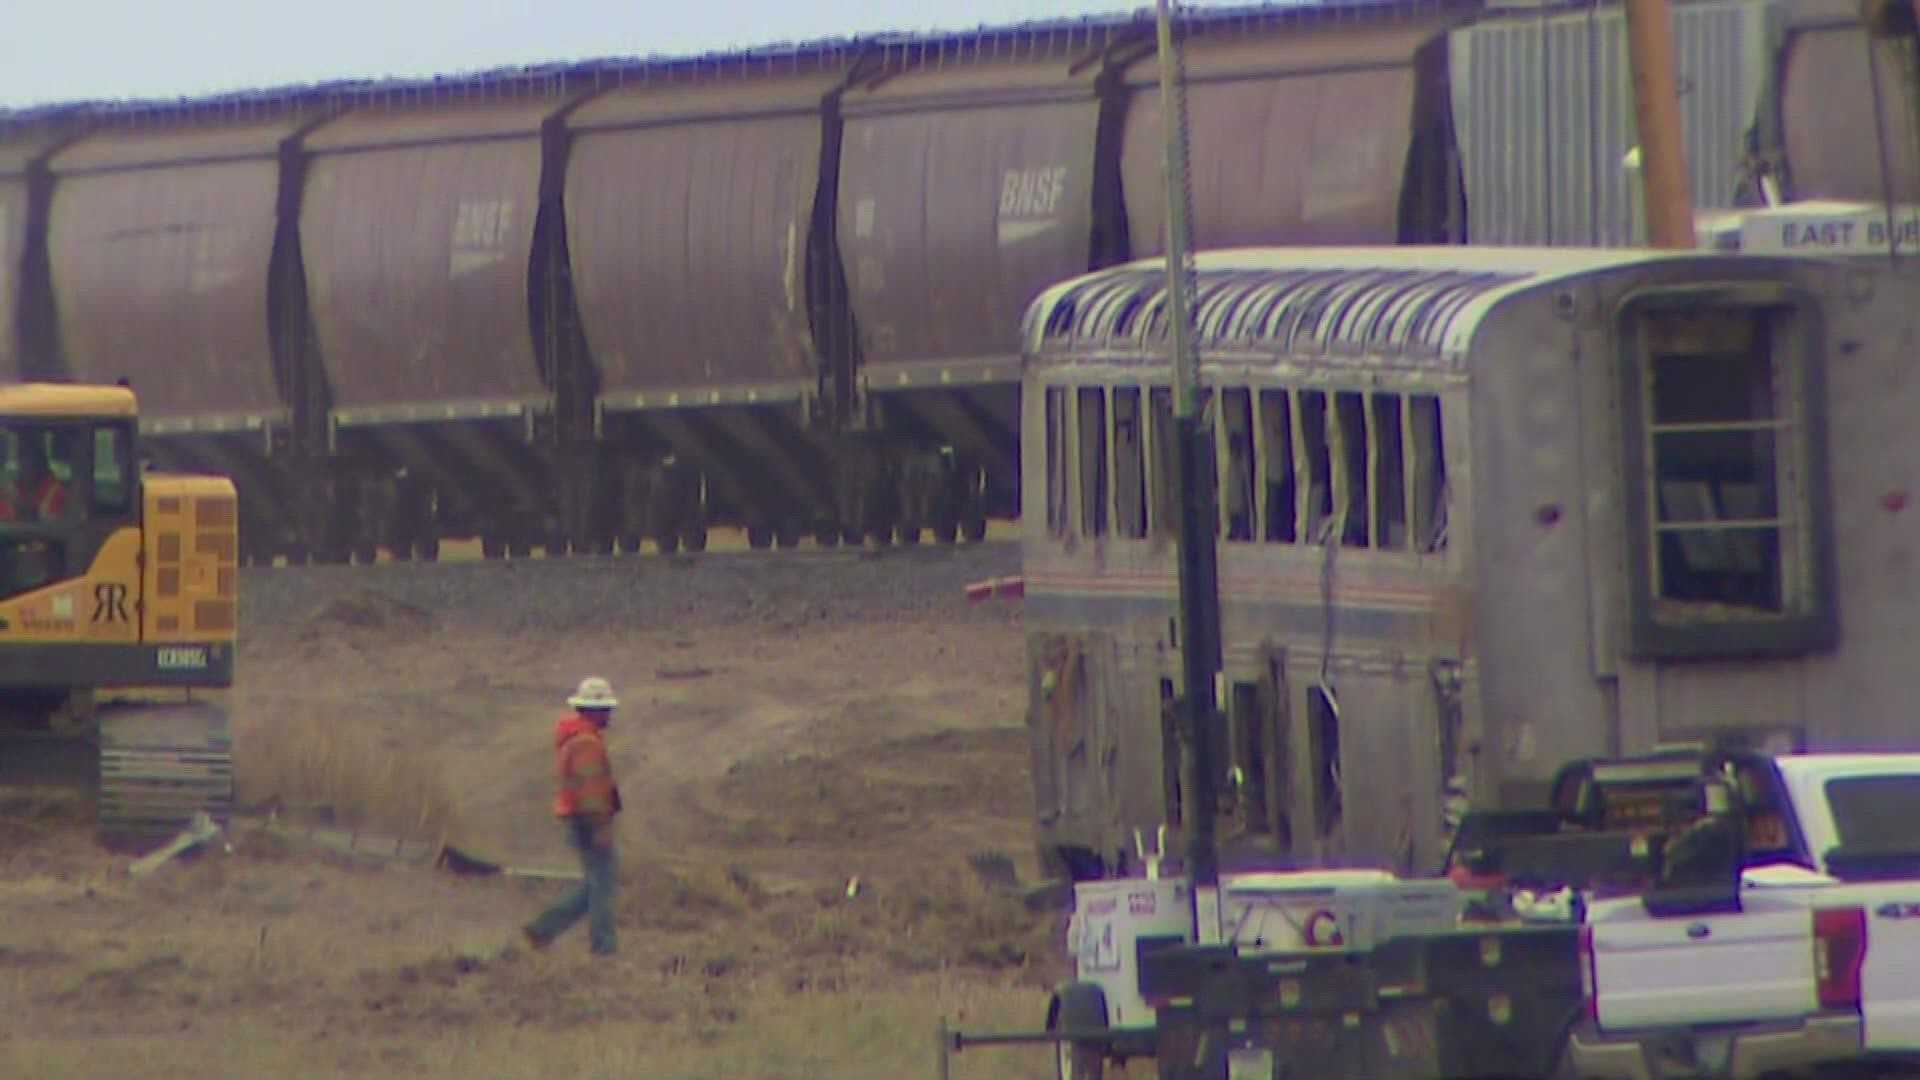 Seven people have filed lawsuits against Amtrak and BNSF Railways over the deadly train derailment that happened Sept. 25, 2021, in Montana.